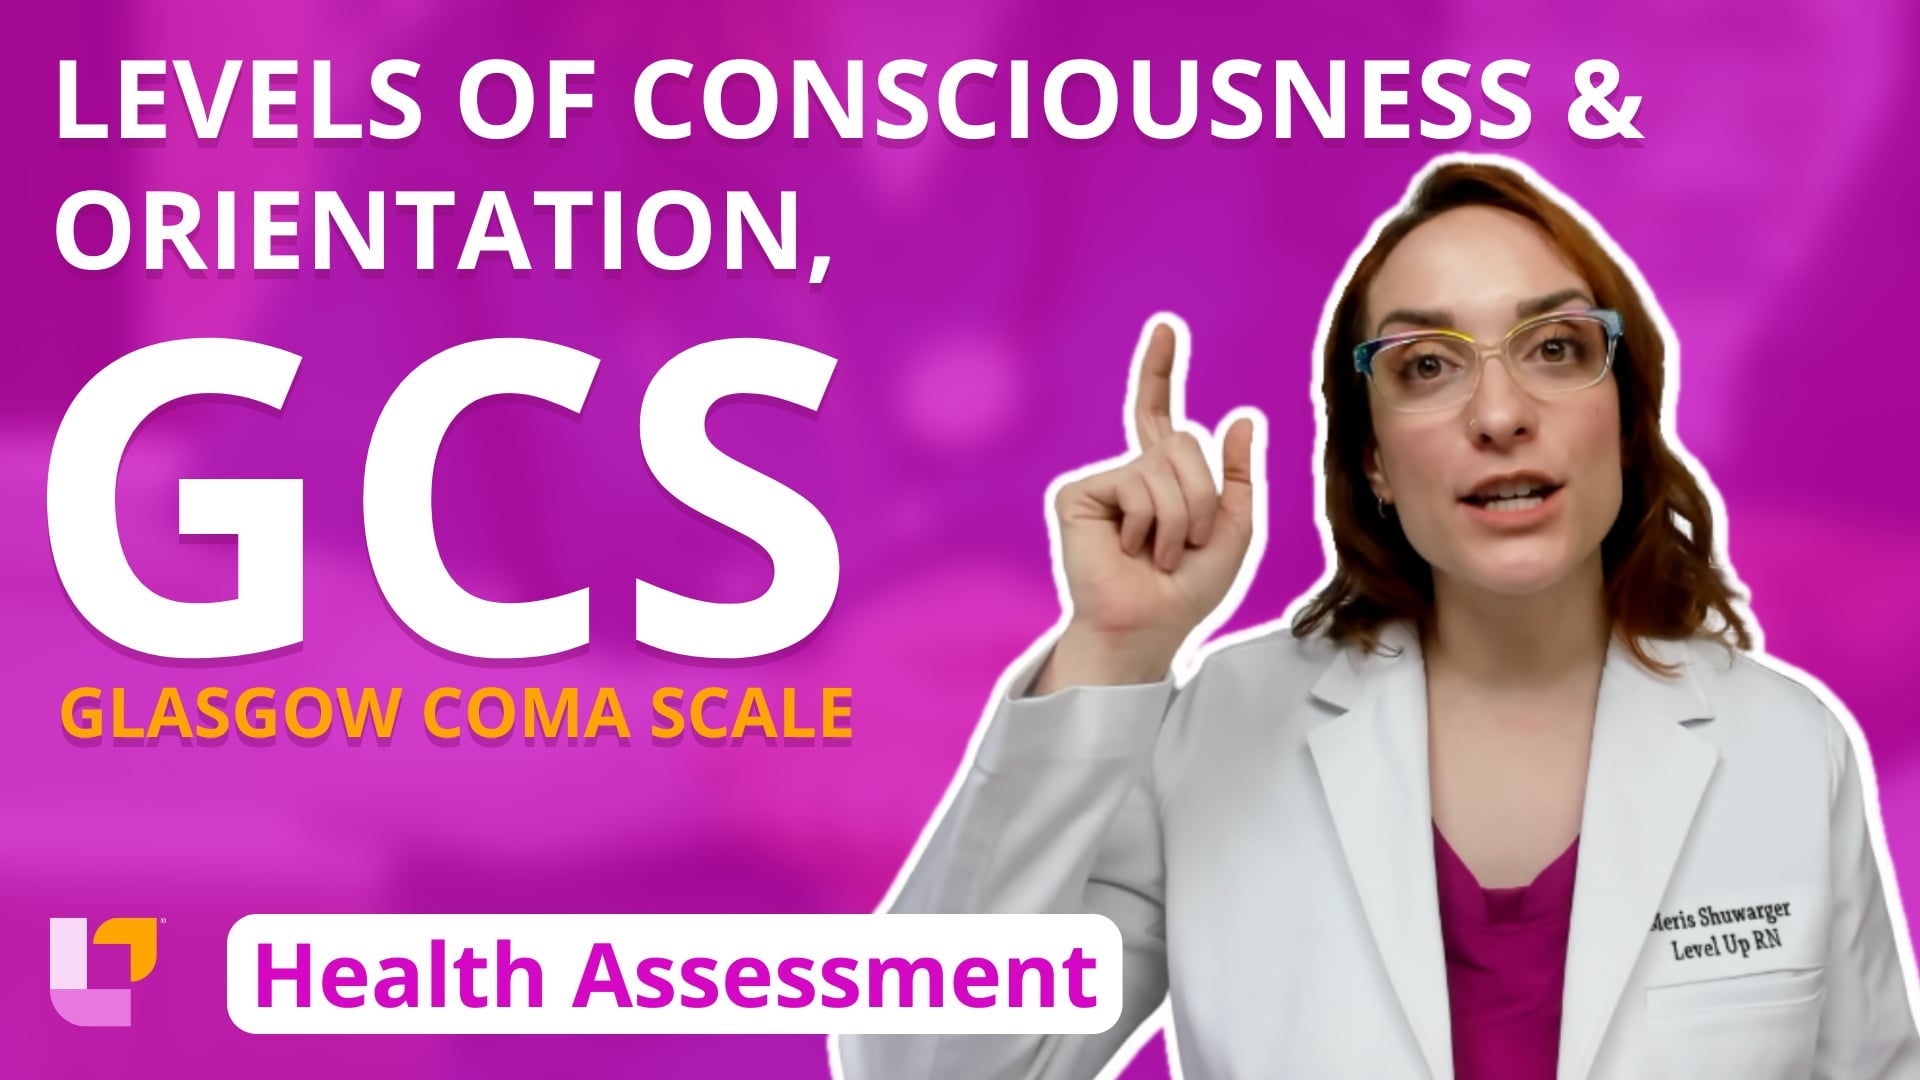 Health Assessment, part 3: Levels of Consciousness and Orientation, Glasgow Coma Scale - LevelUpRN